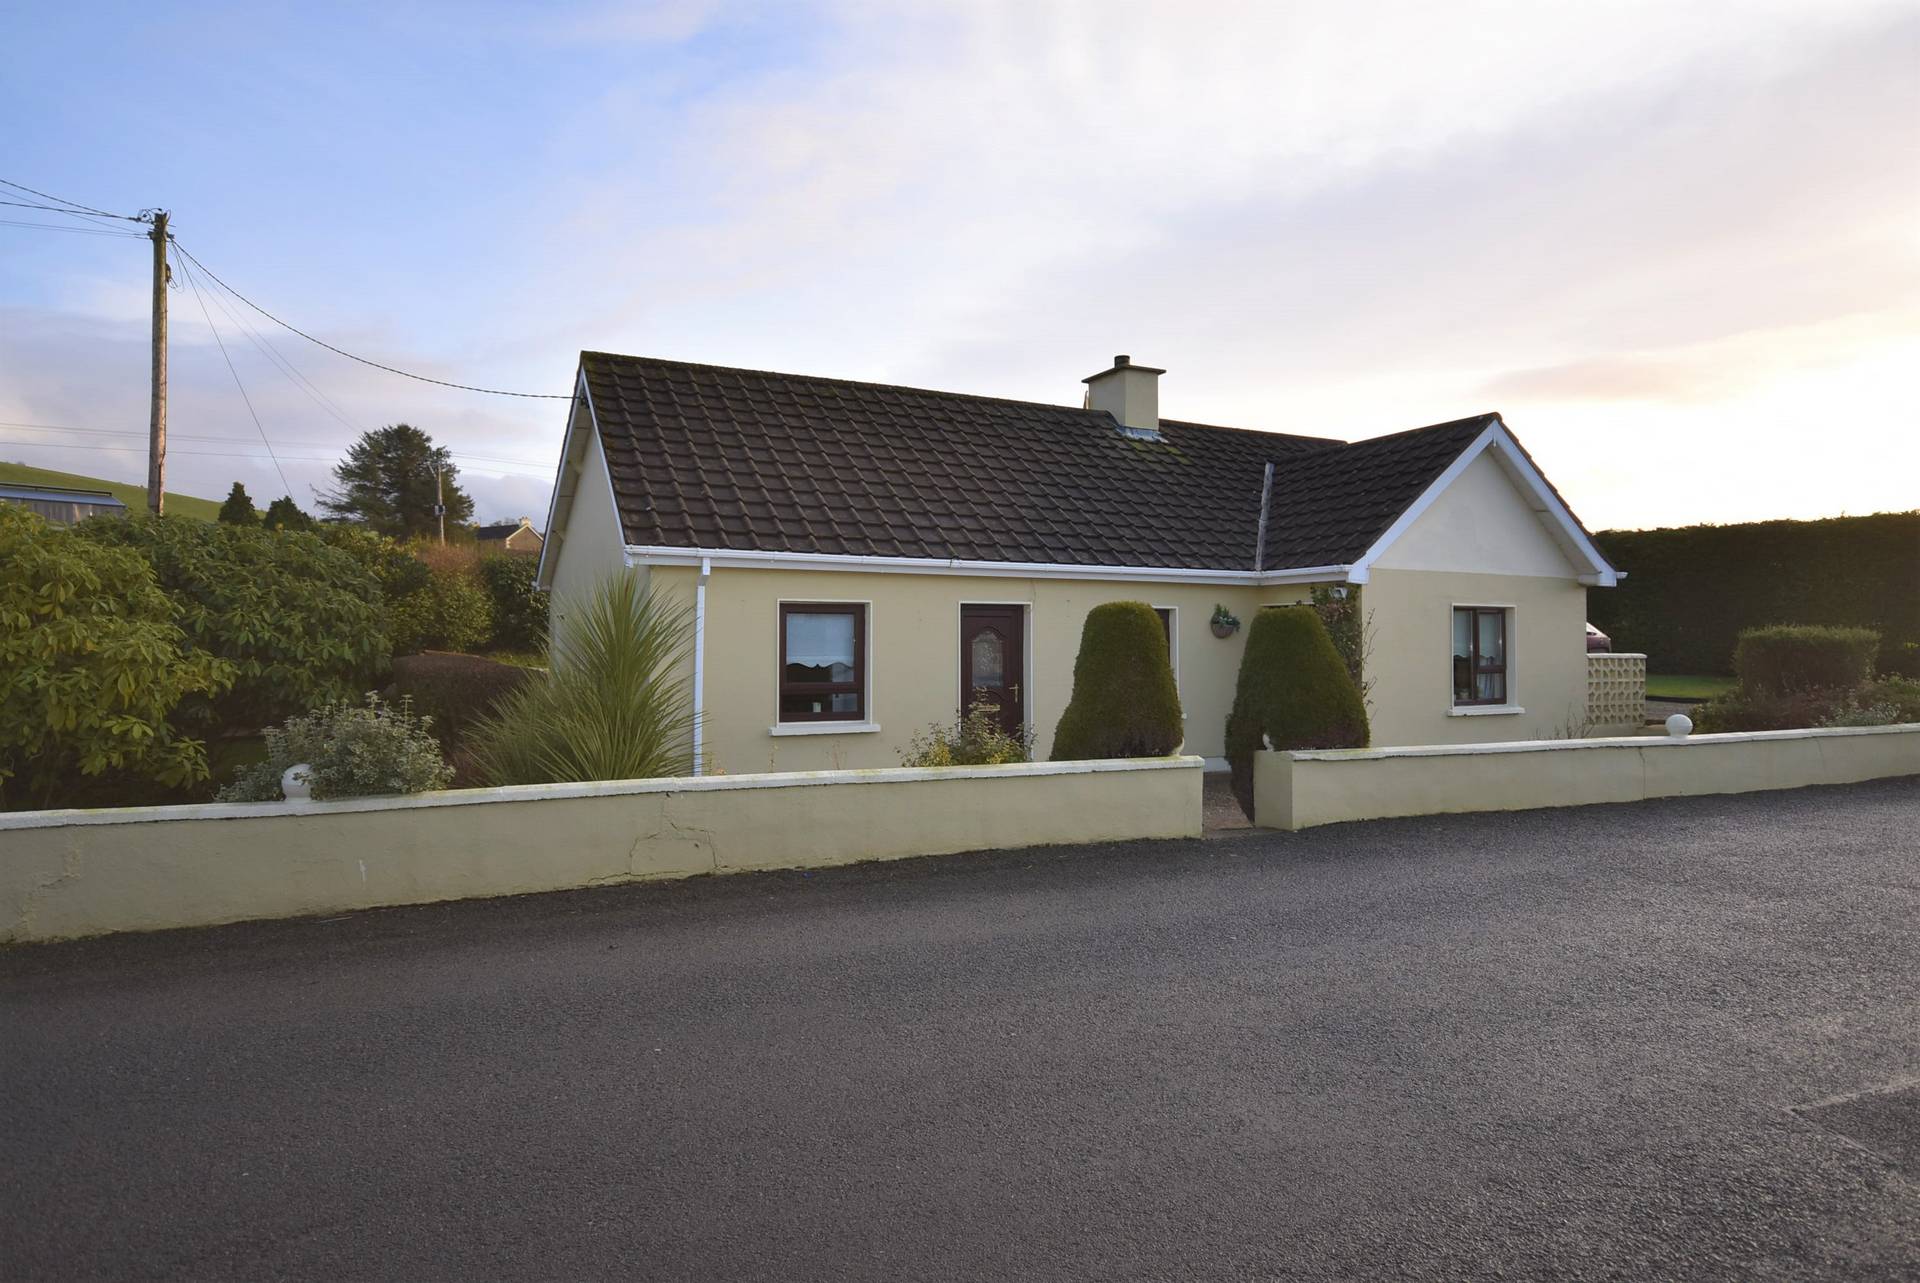 ‘Swilly View’, 60 Dromore, Letterkenny, Co. Donegal, F92 A0FA